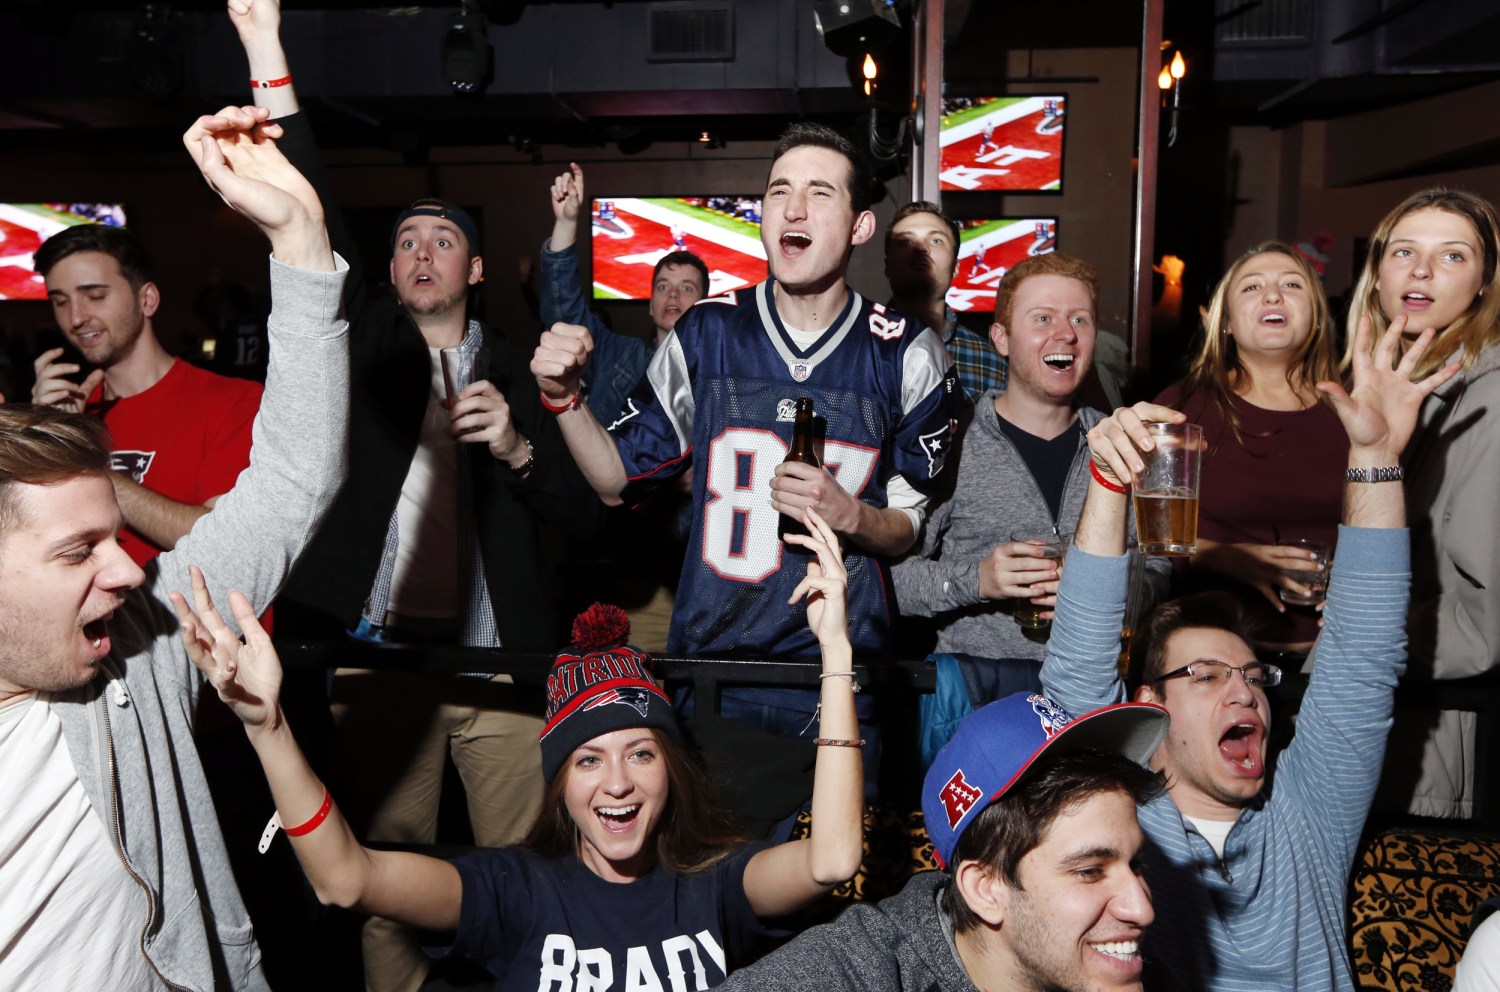 Is Game Night at Sports Bar Becoming a Thing of Past?